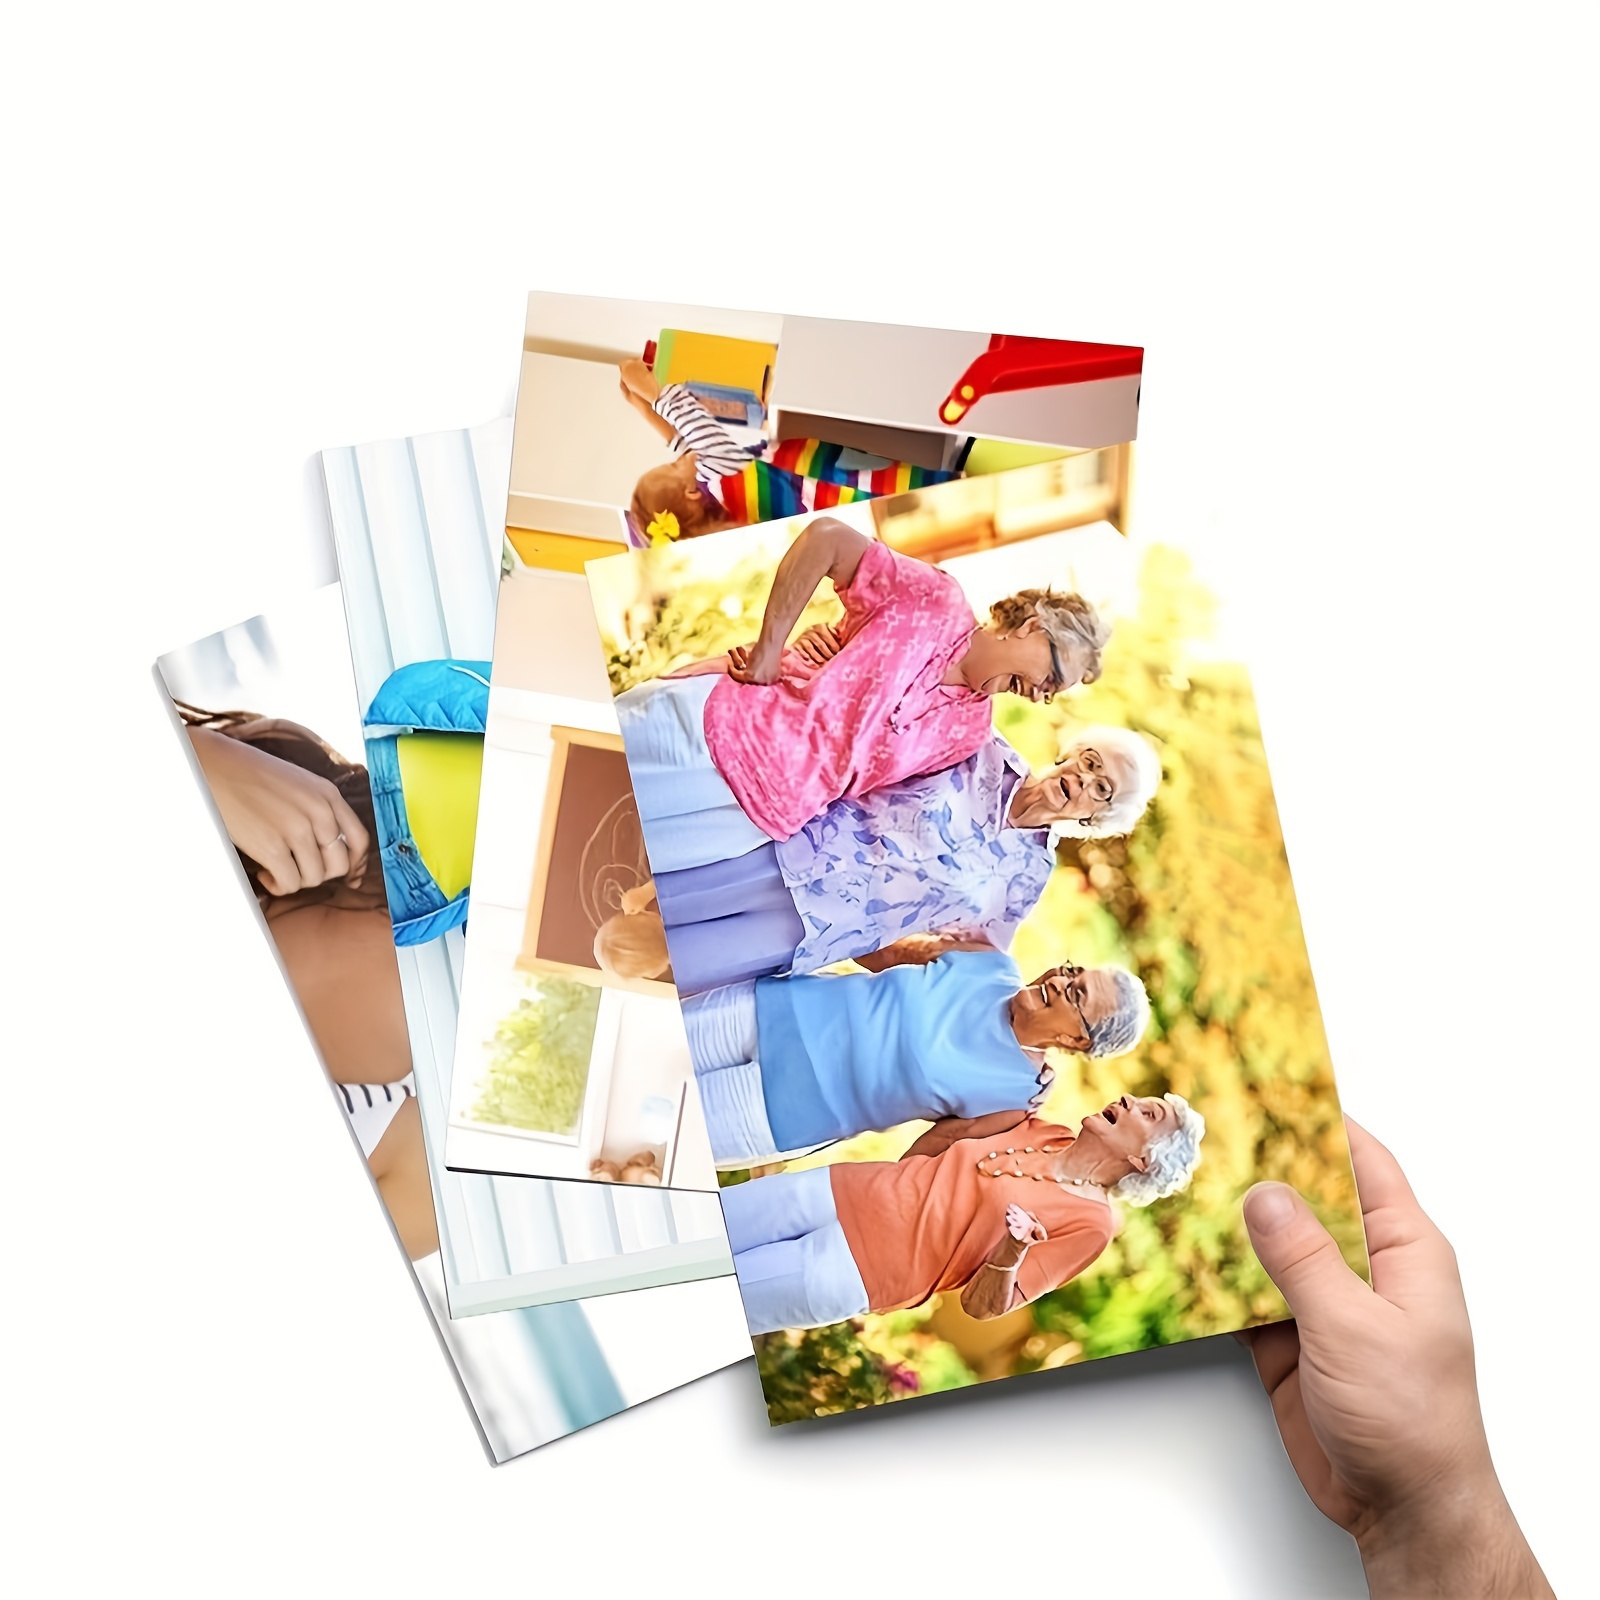 Photo Paper Double-sided Matte 8.5x11inch 50 Sheets, Compatible